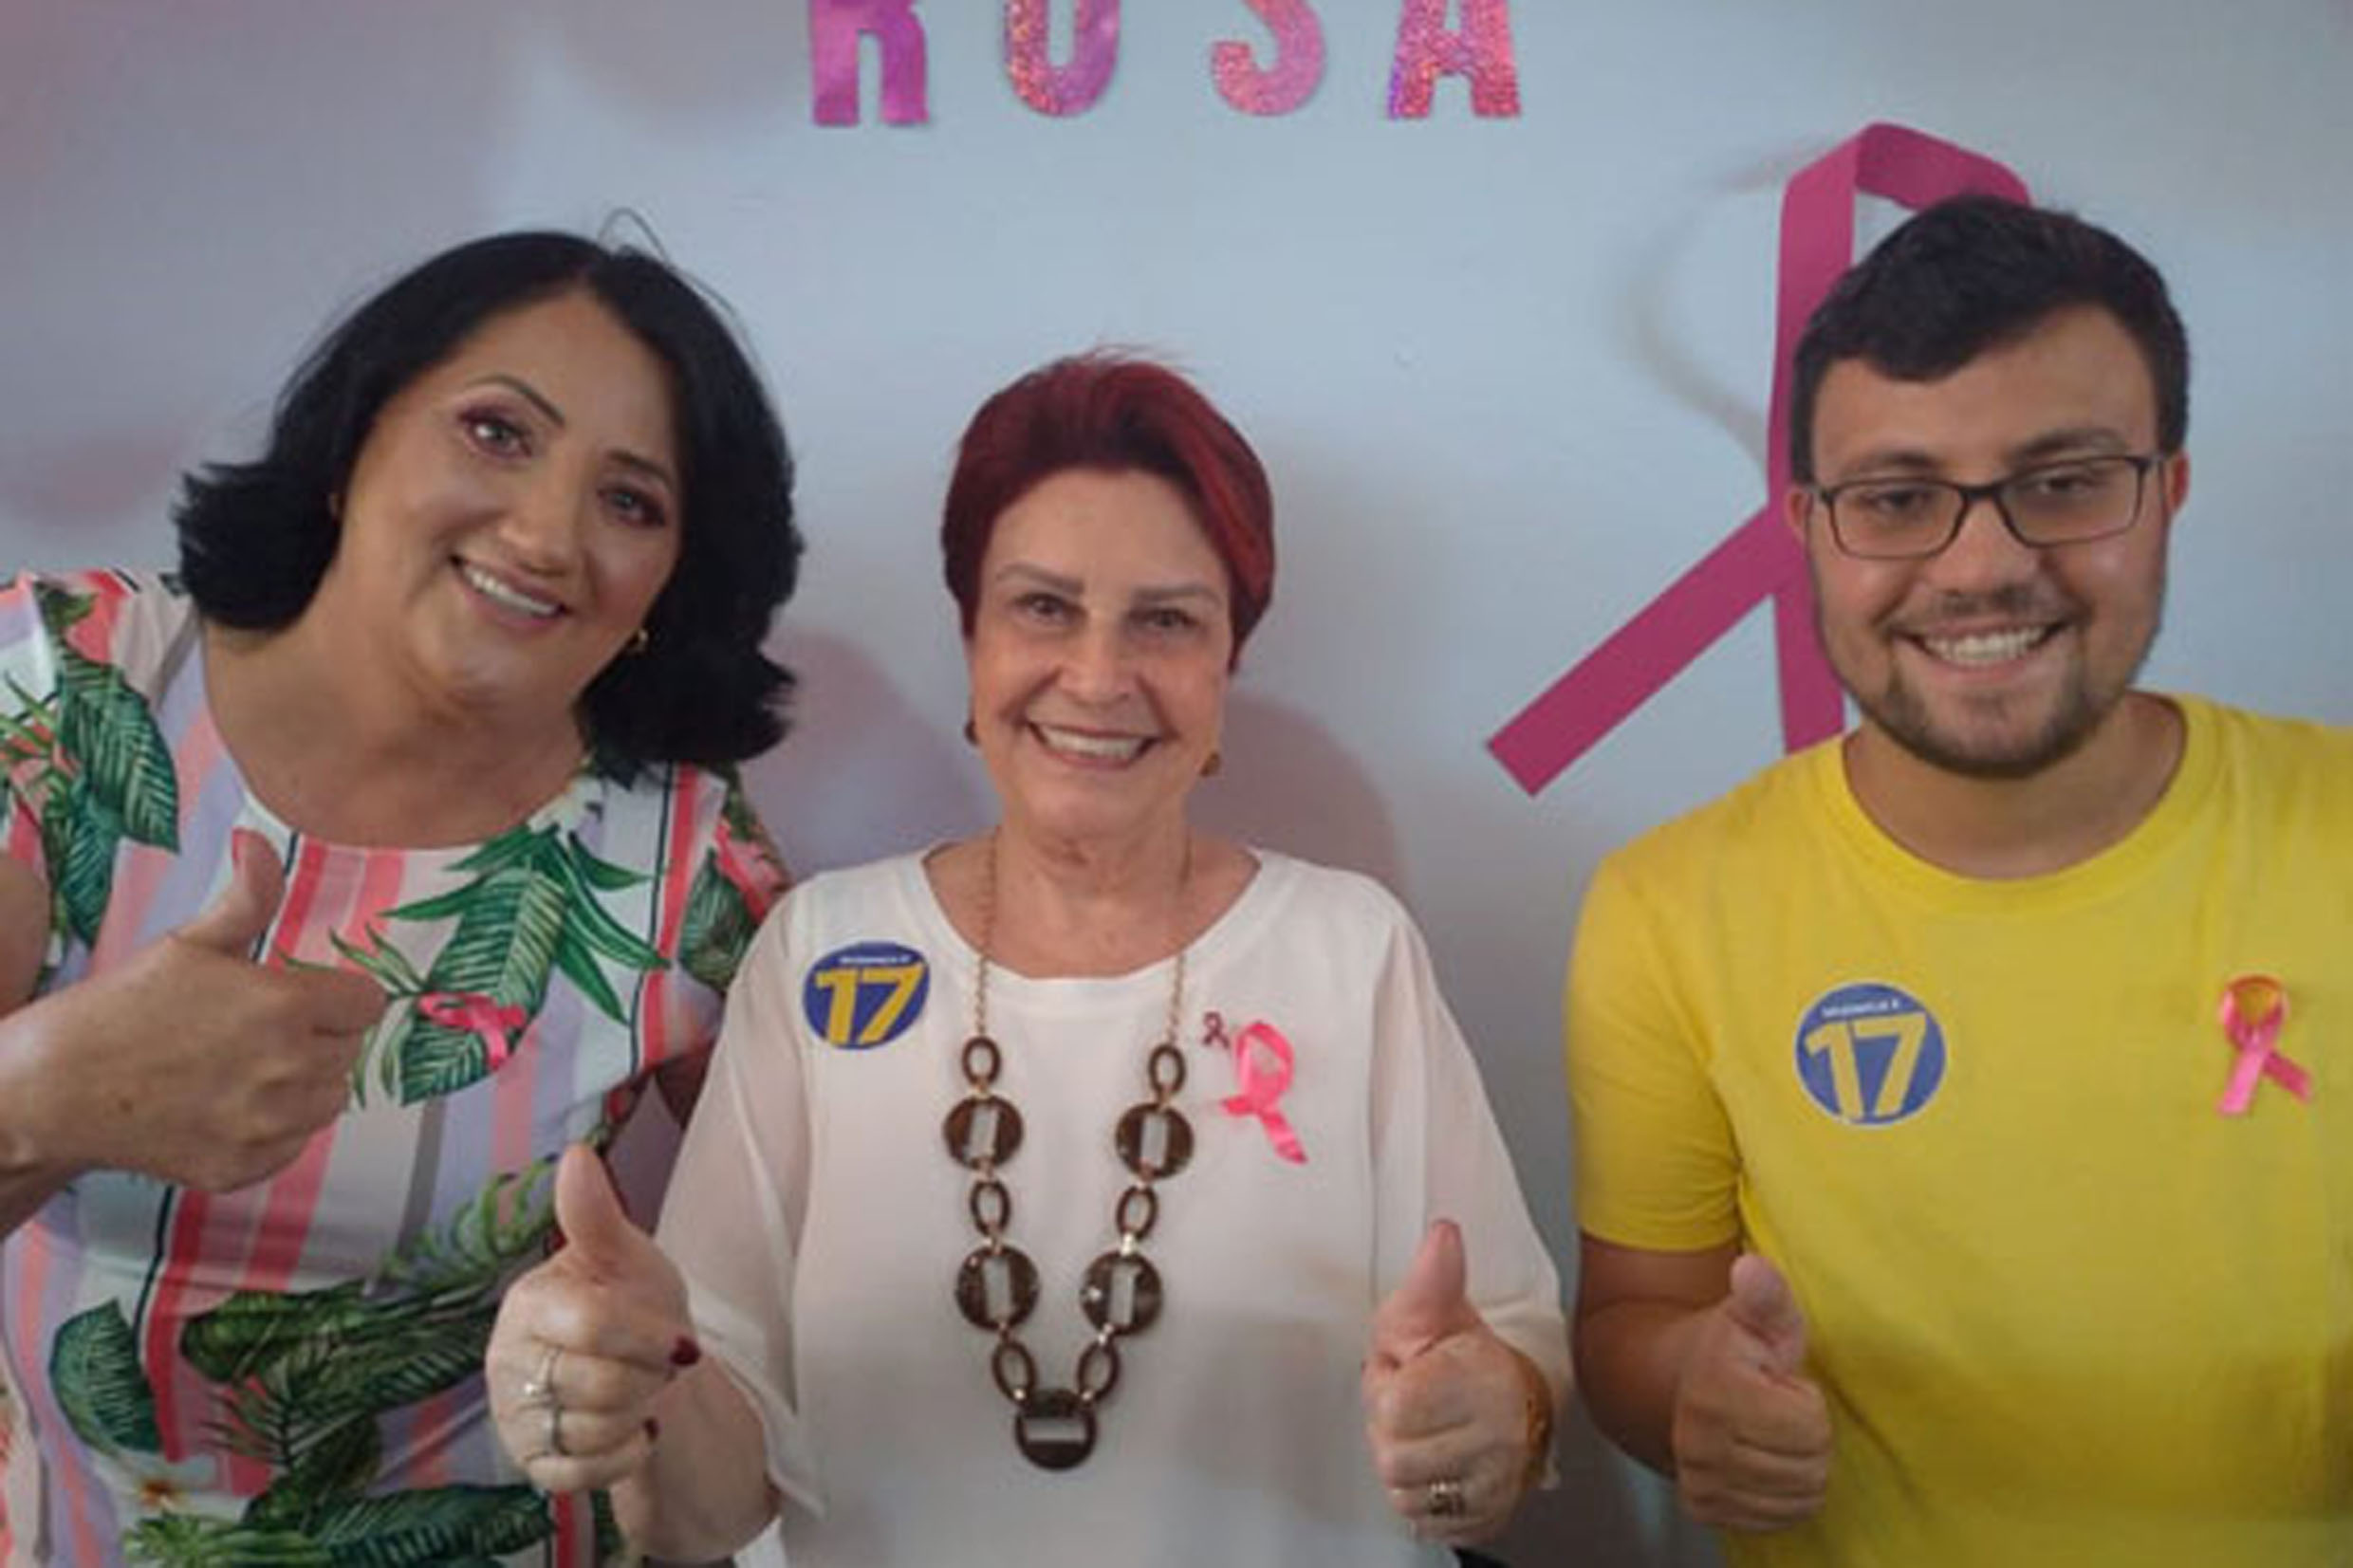 Edna Macedo (ao centro)<a style='float:right' href='https://www3.al.sp.gov.br/repositorio/noticia/N-10-2020/fg256090.jpg' target=_blank><img src='/_img/material-file-download-white.png' width='14px' alt='Clique para baixar a imagem'></a>